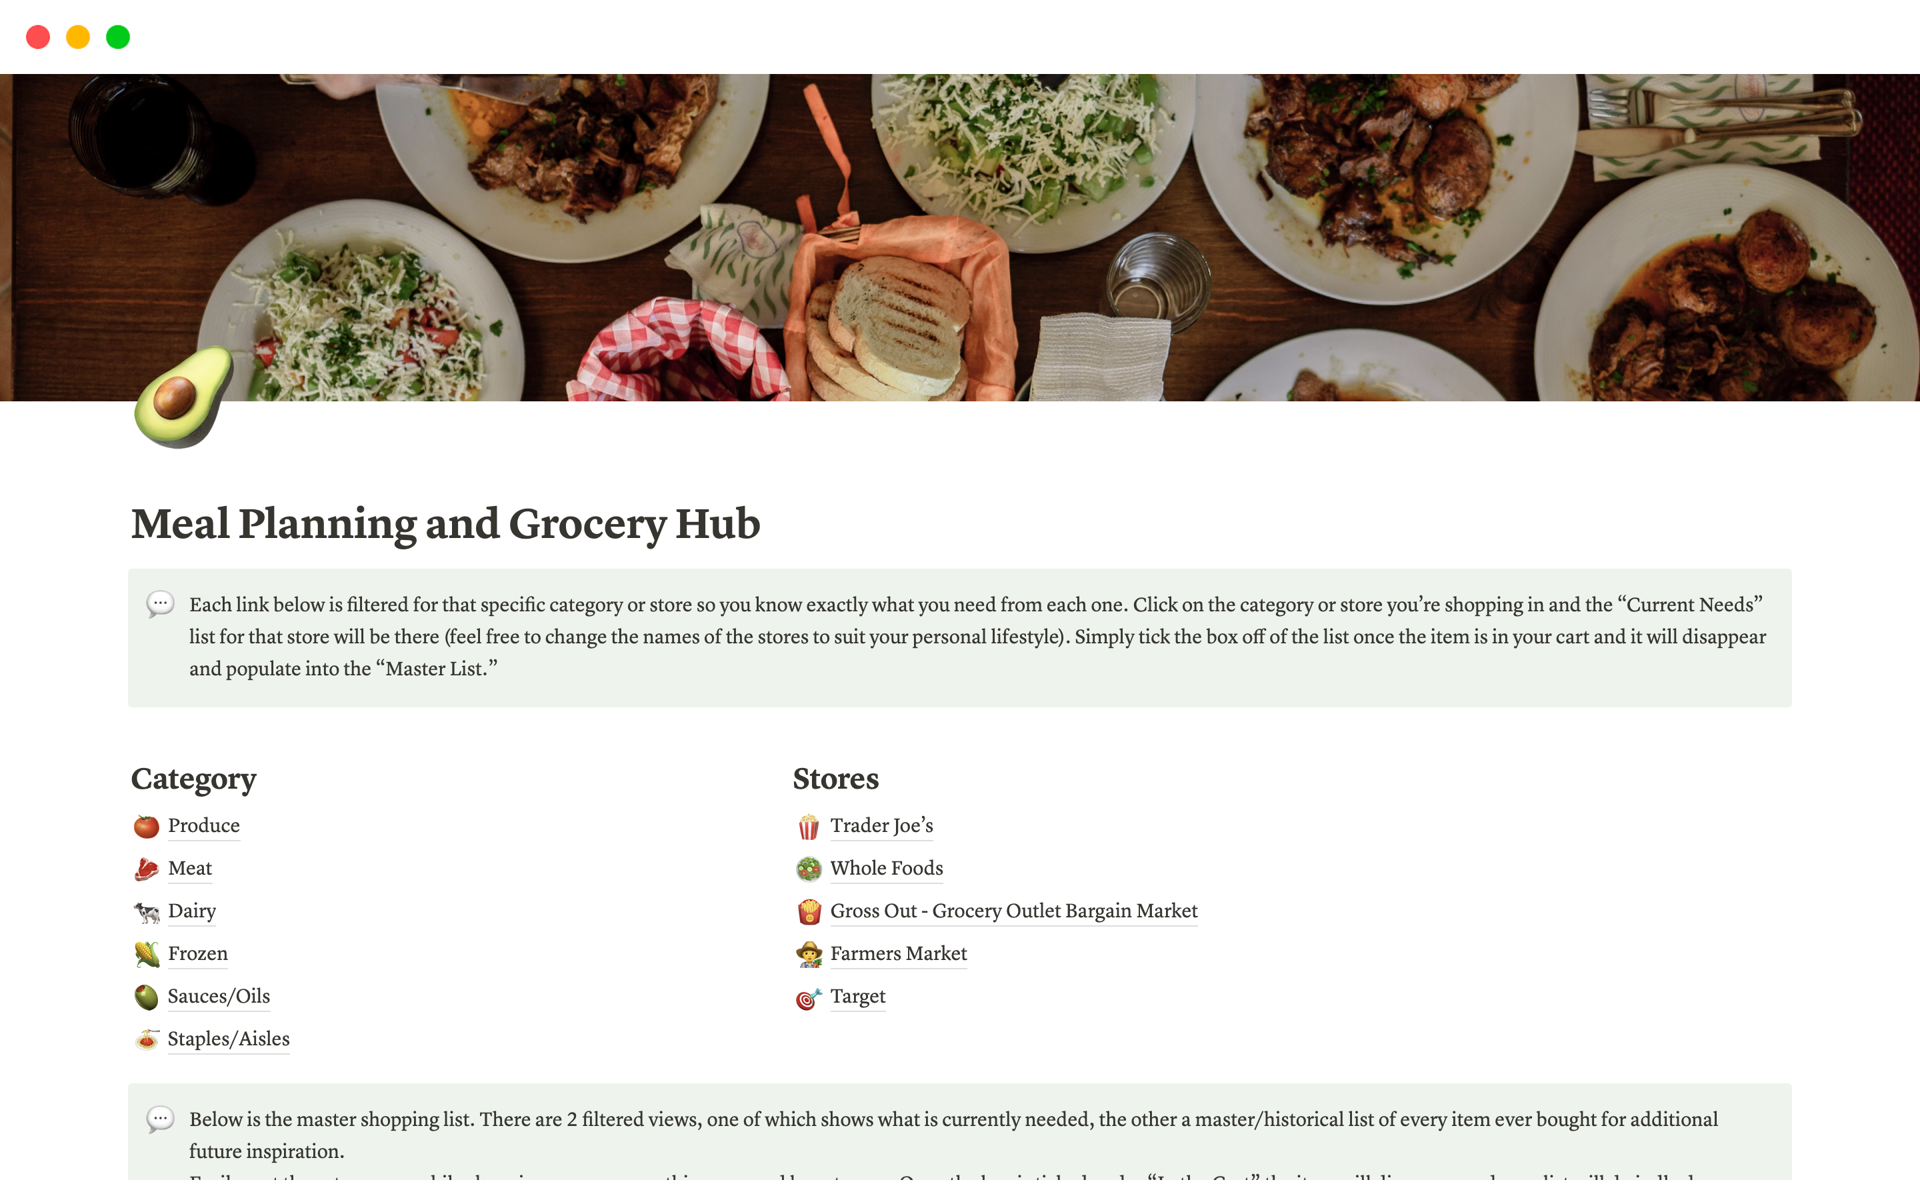 Make meal planning and grocery shopping more efficient and fun! 